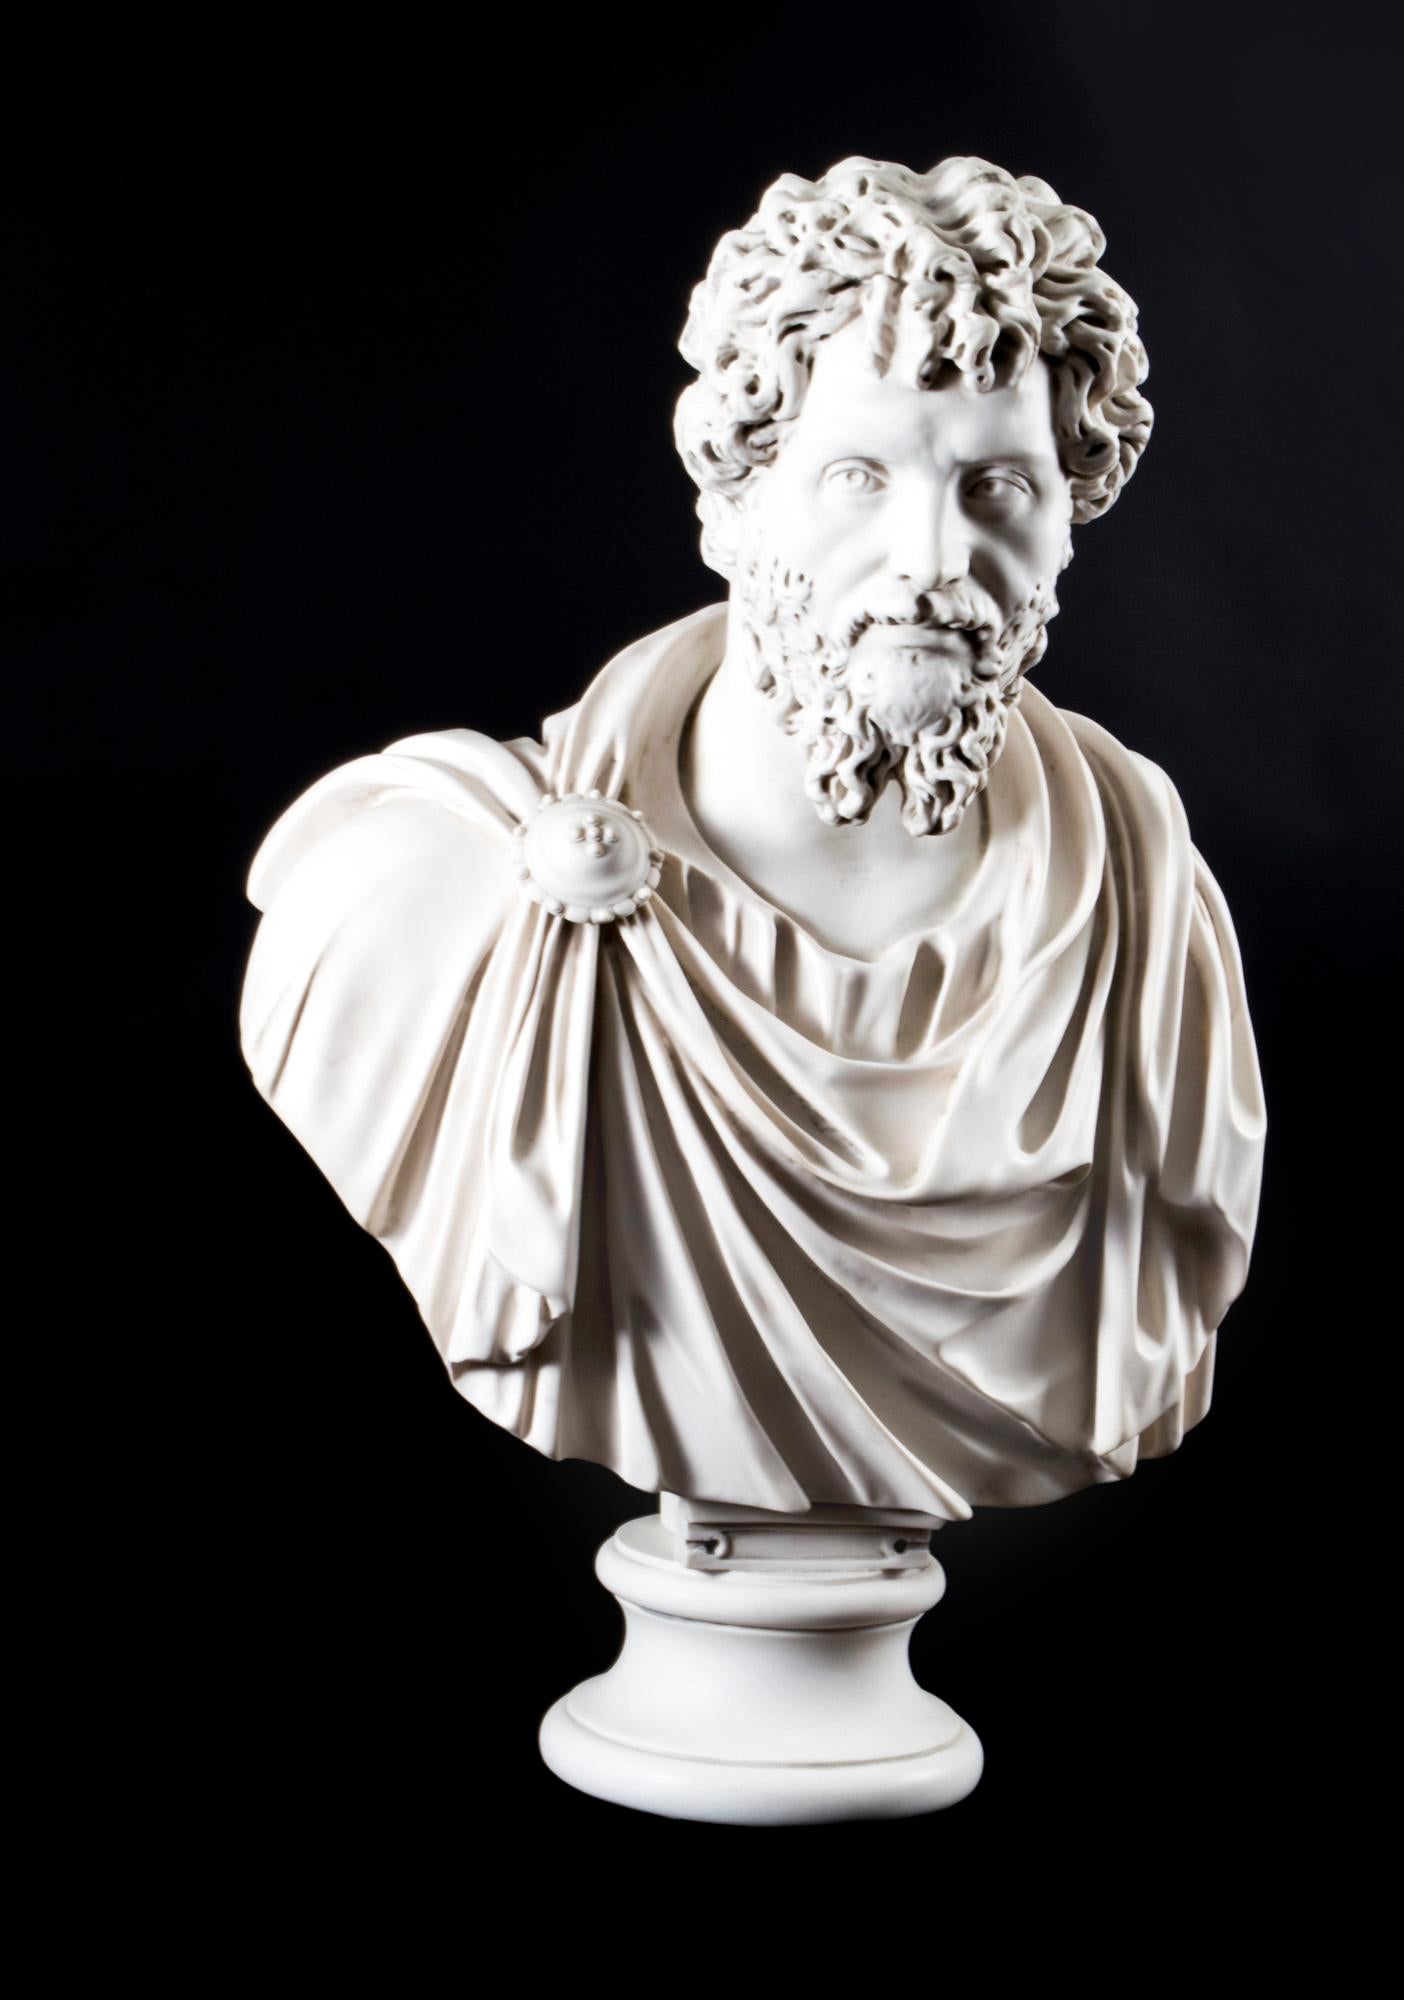 A beautifully sculpted marble bust of the famous Roman Emperor Lusias Versus dating from the last quarter of the 20th century. 

He is wearing a flowing toga with a fibulae or broach holding it in place, on a matching elegant pedestal in the form